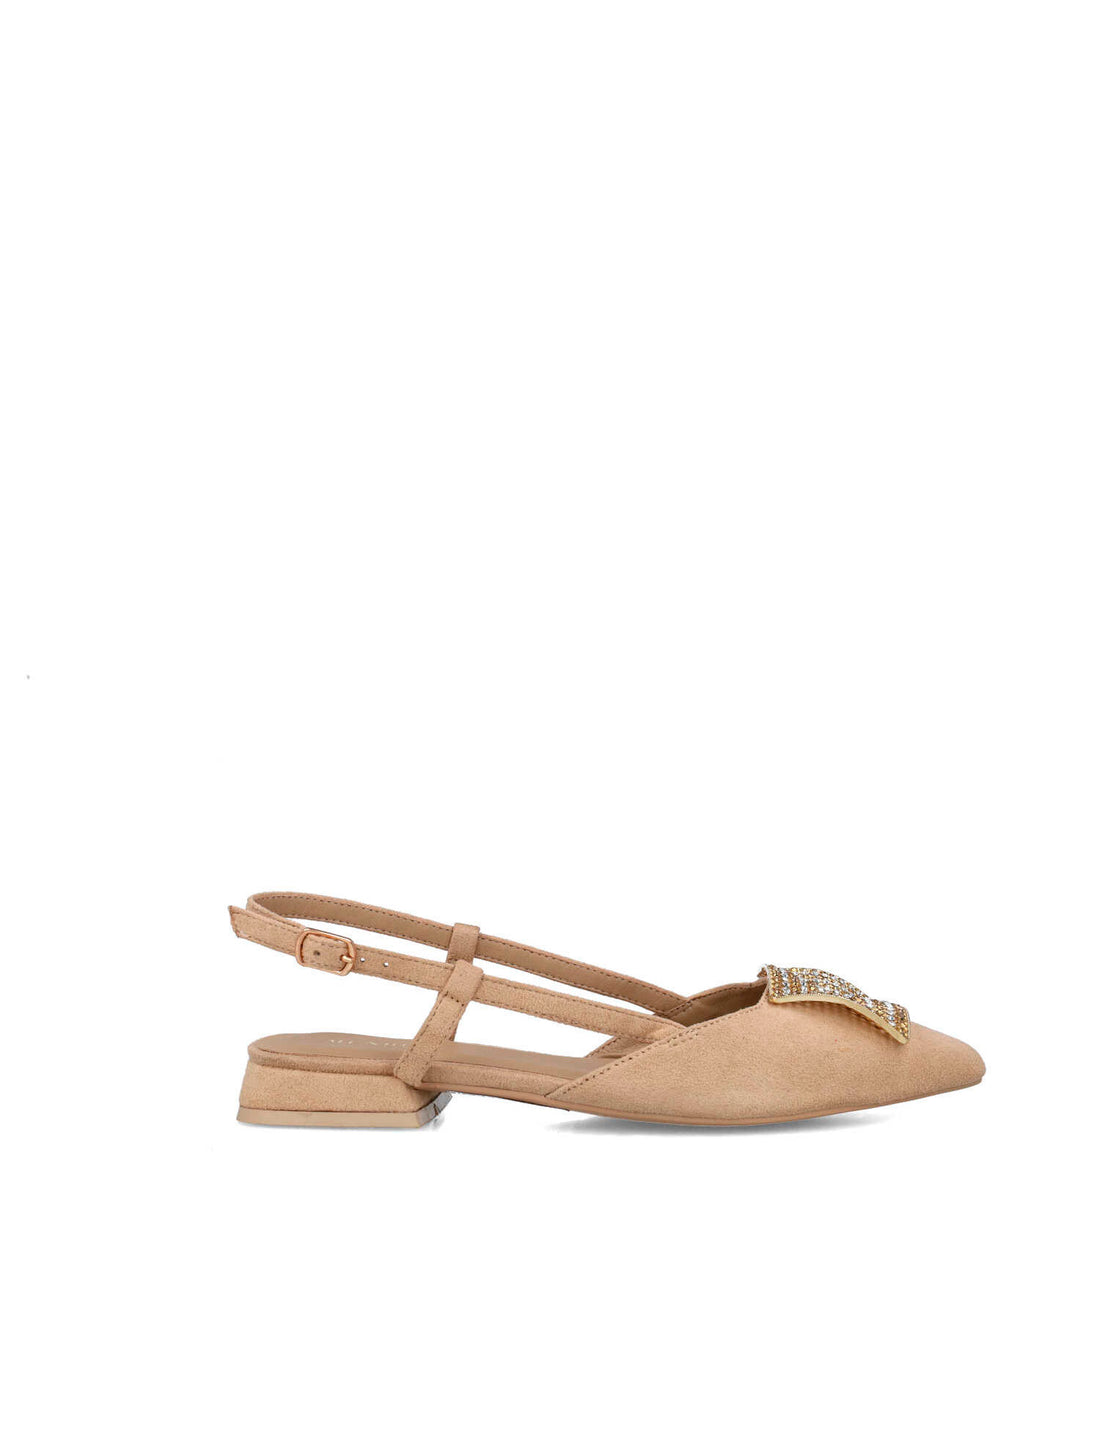 Beige Slingback Mules With Embellishment_25458_87_01